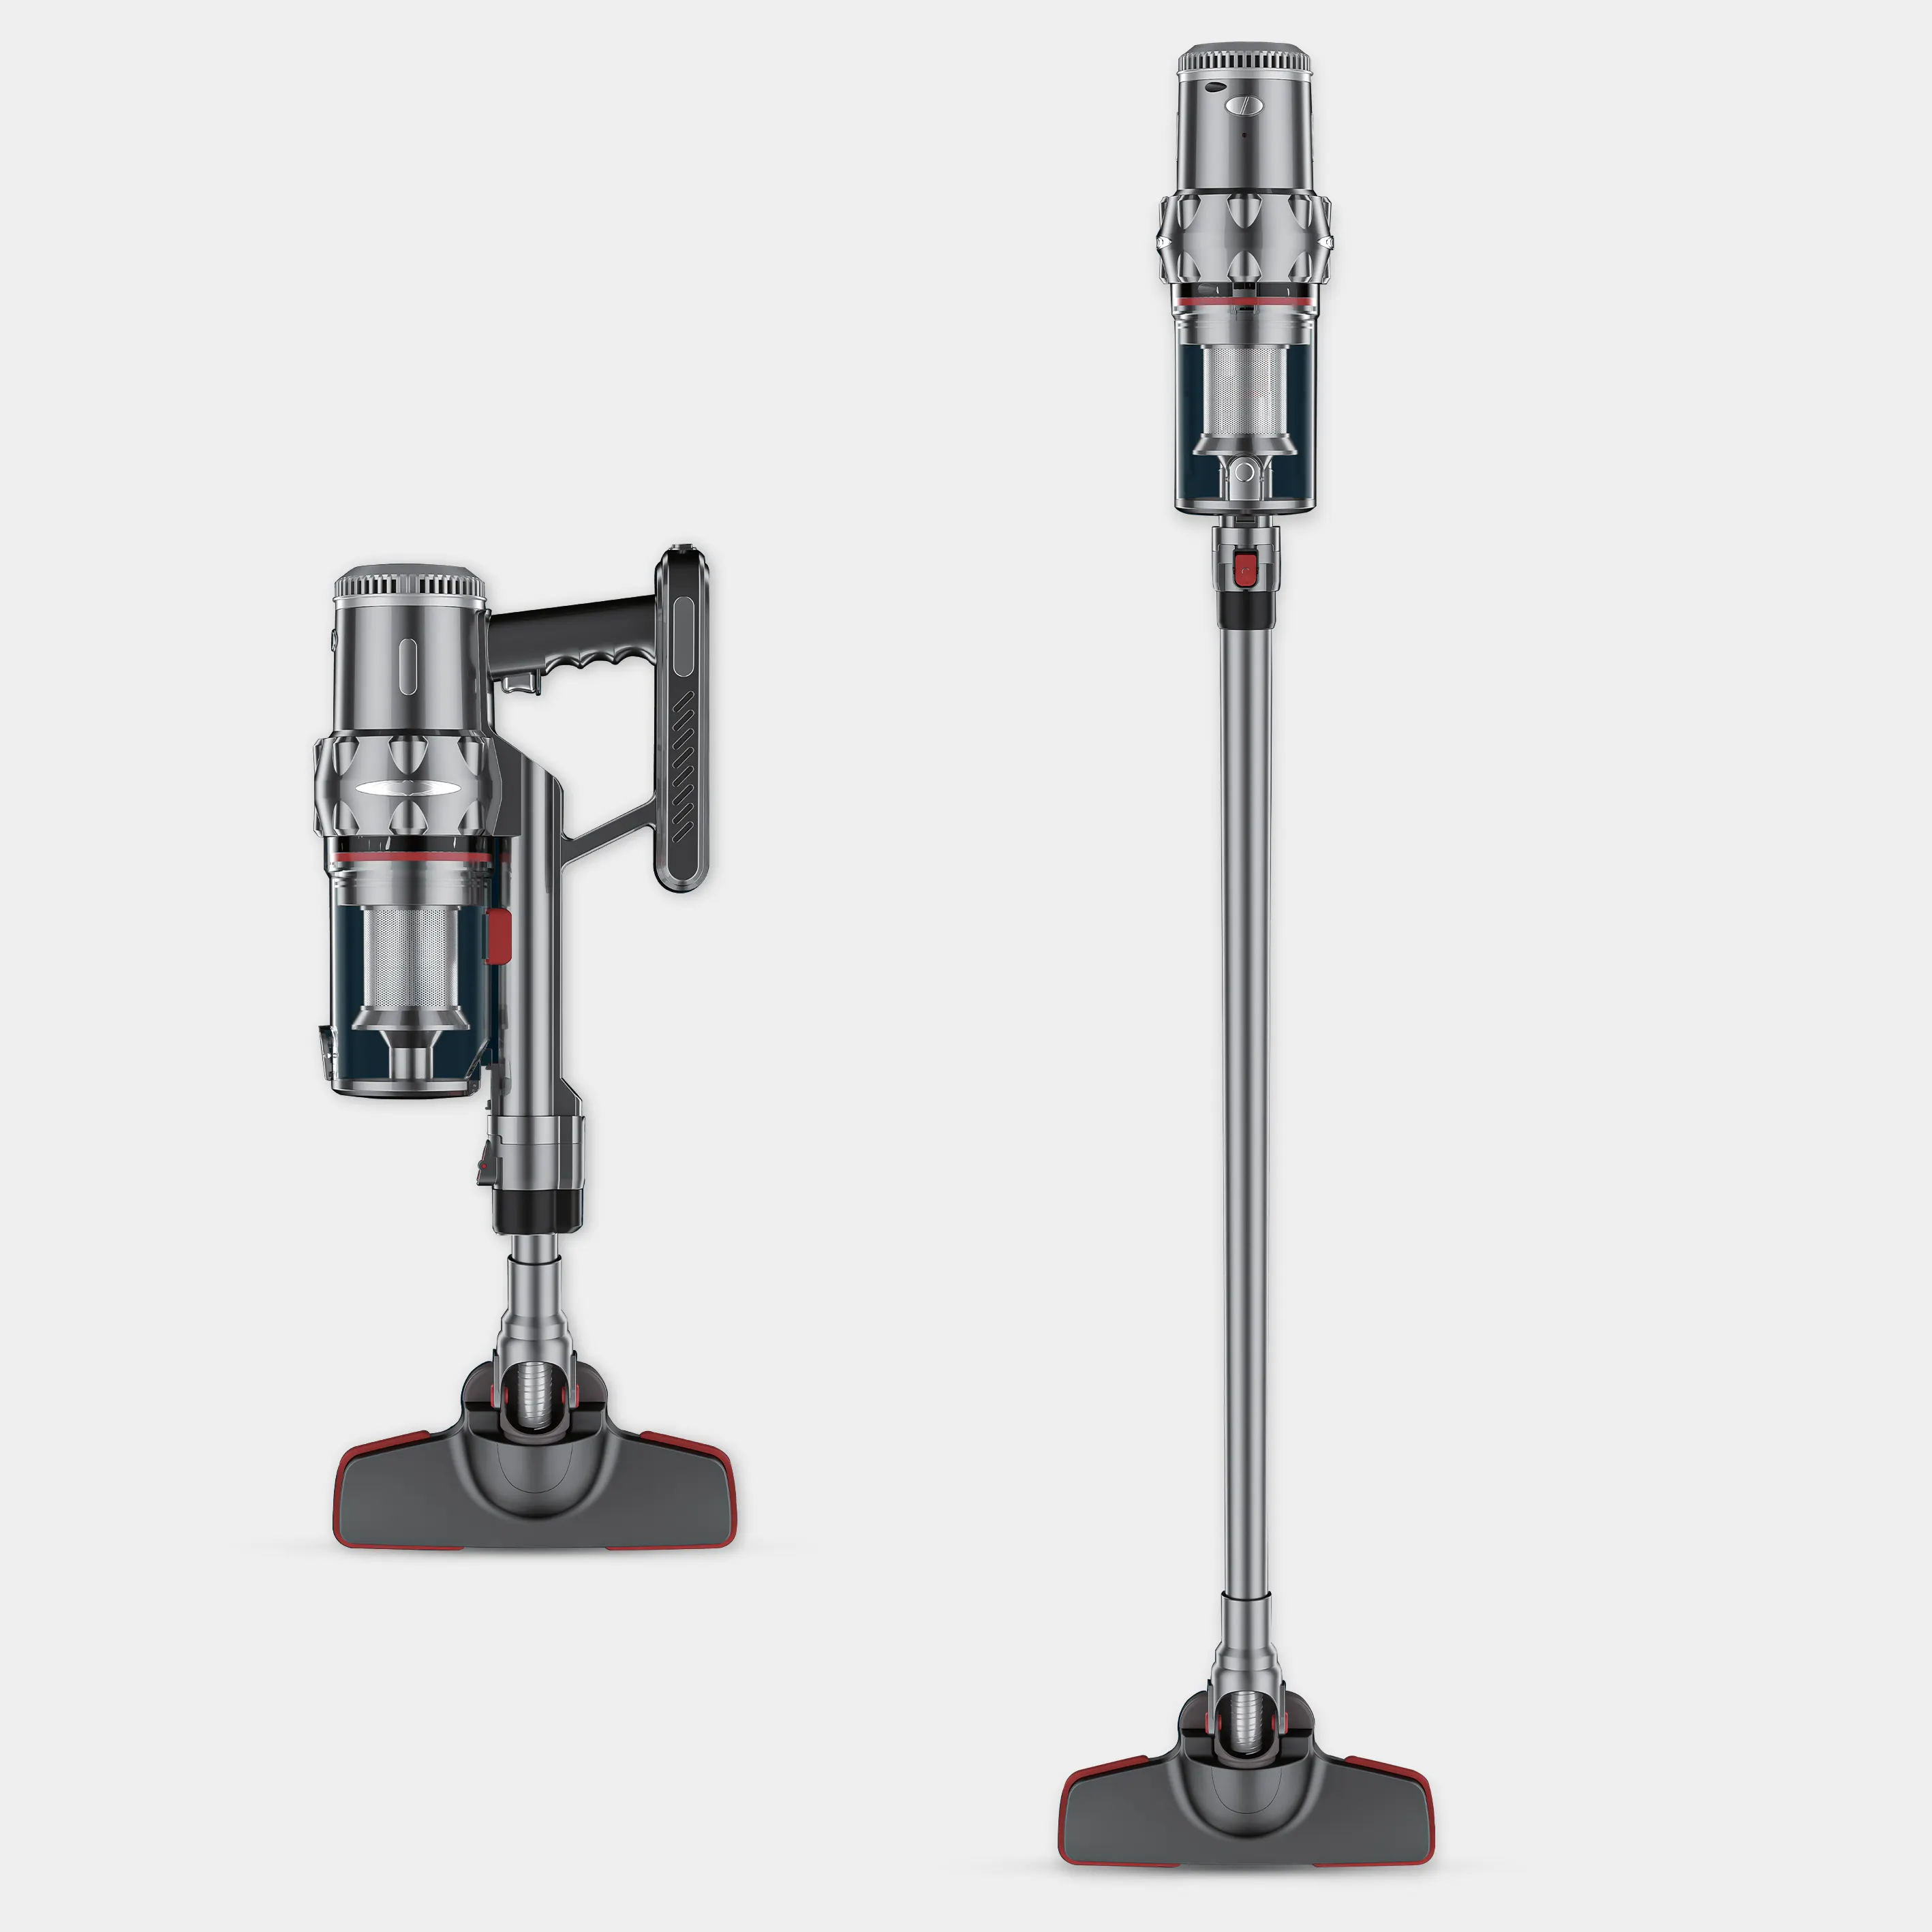 Newest Factory Uplight Wireless Cordless Stick Vacuum Cleaner OEM or Small quantity Wholesale